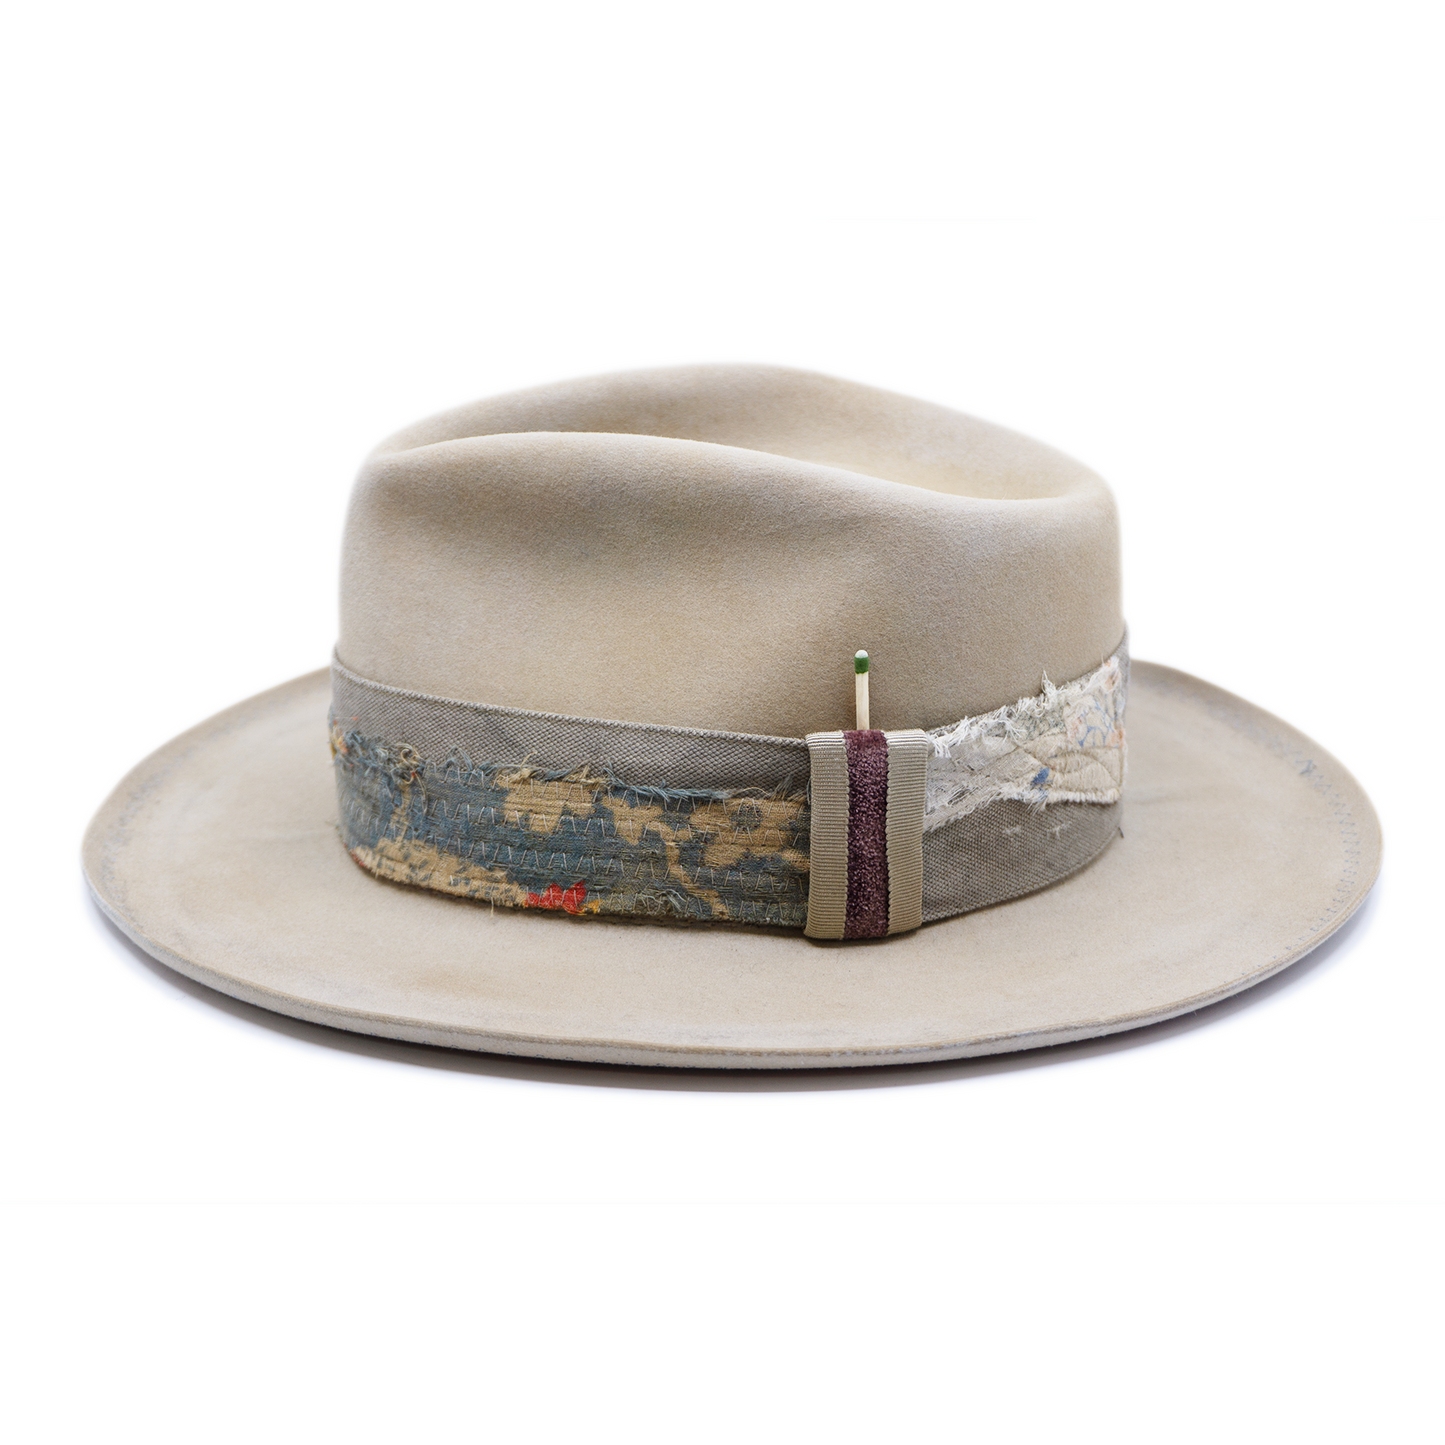 100% felt hat in Silver Belly   Western Weight  Coffee dye   2” multi fabric band   Velvet with tonal grosgrain center bow   Light blue zig zag stitching on brim   Pencil curled brim  Made in USA